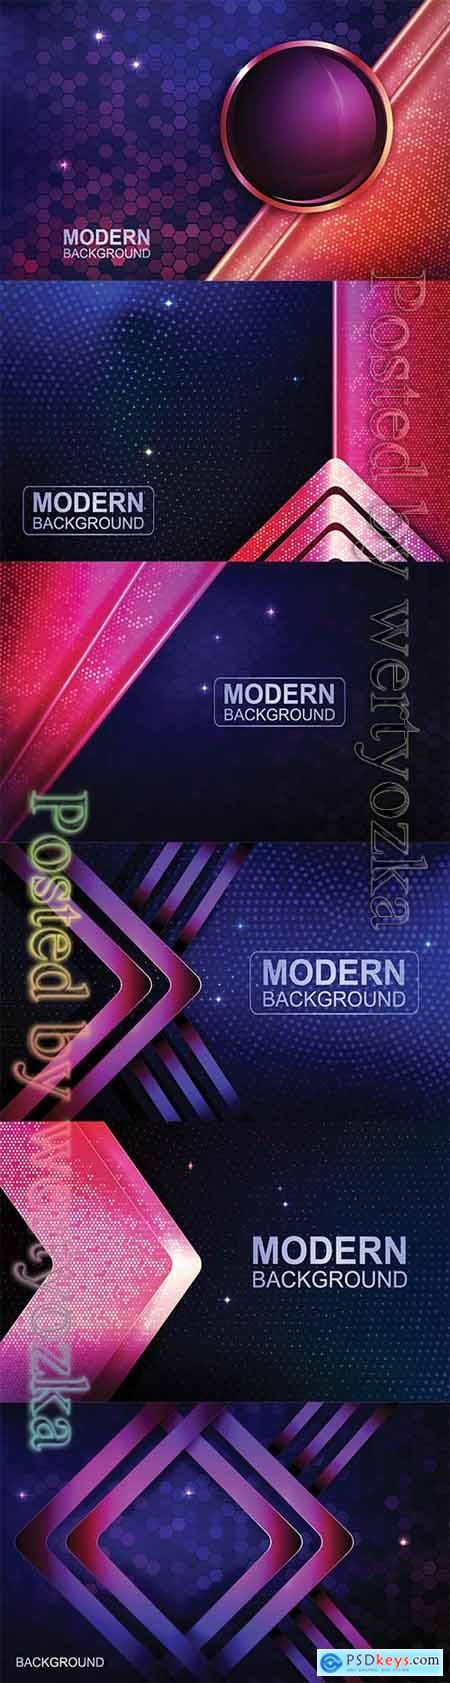 Abstract luxury vector backgrounds with different shapes